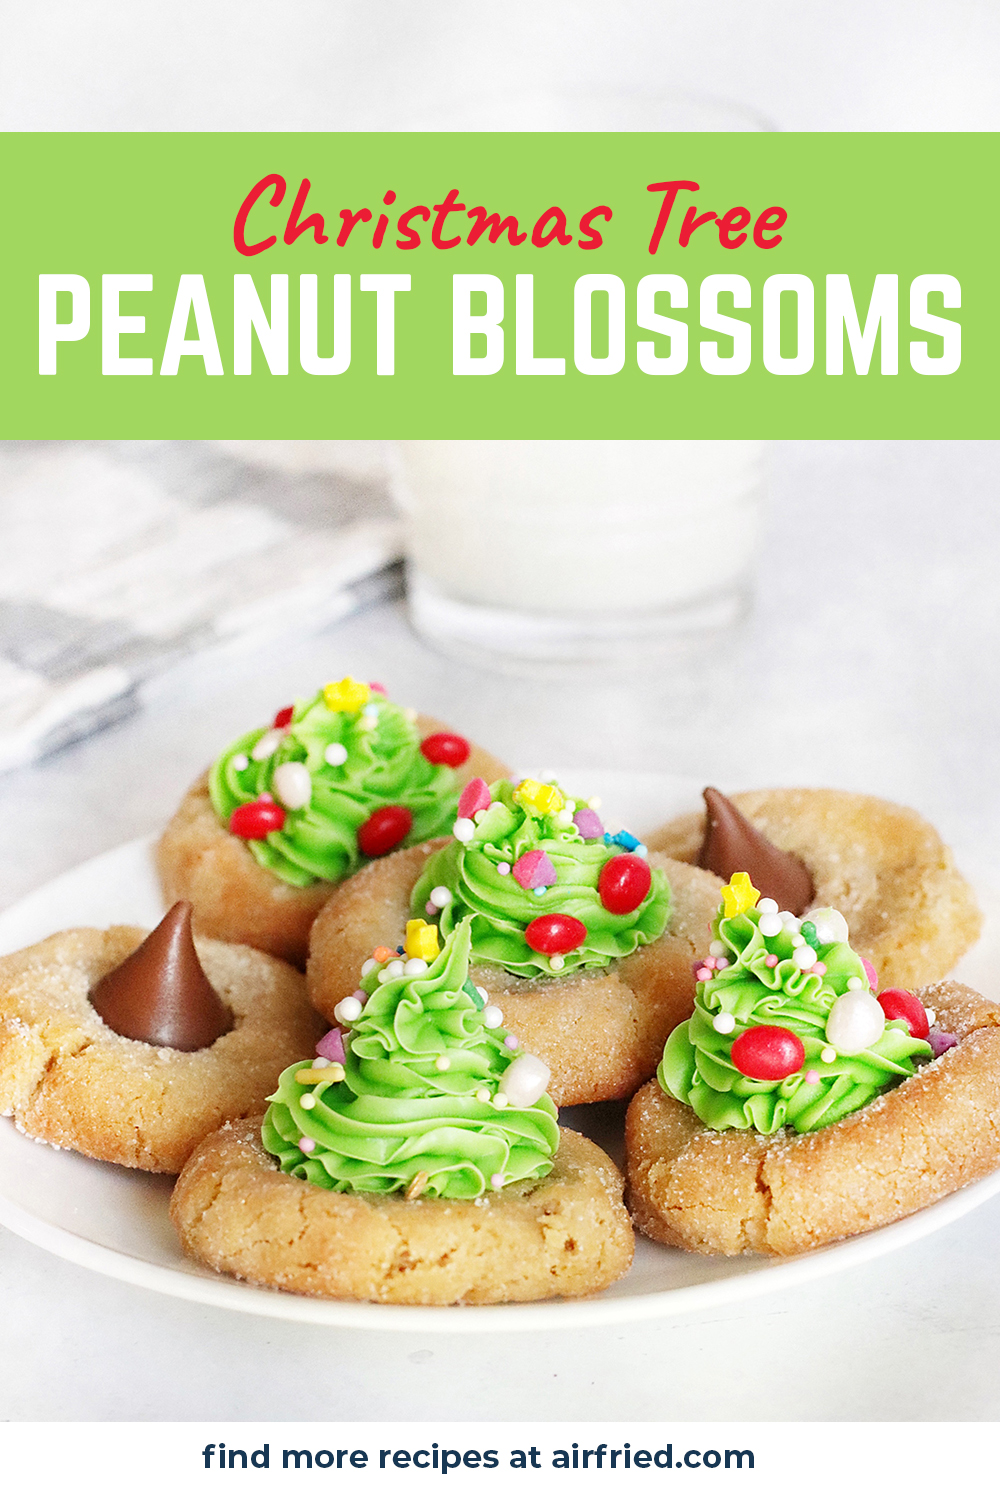 These are the prettiest Peanut butter blossom cookies I have ever seen!